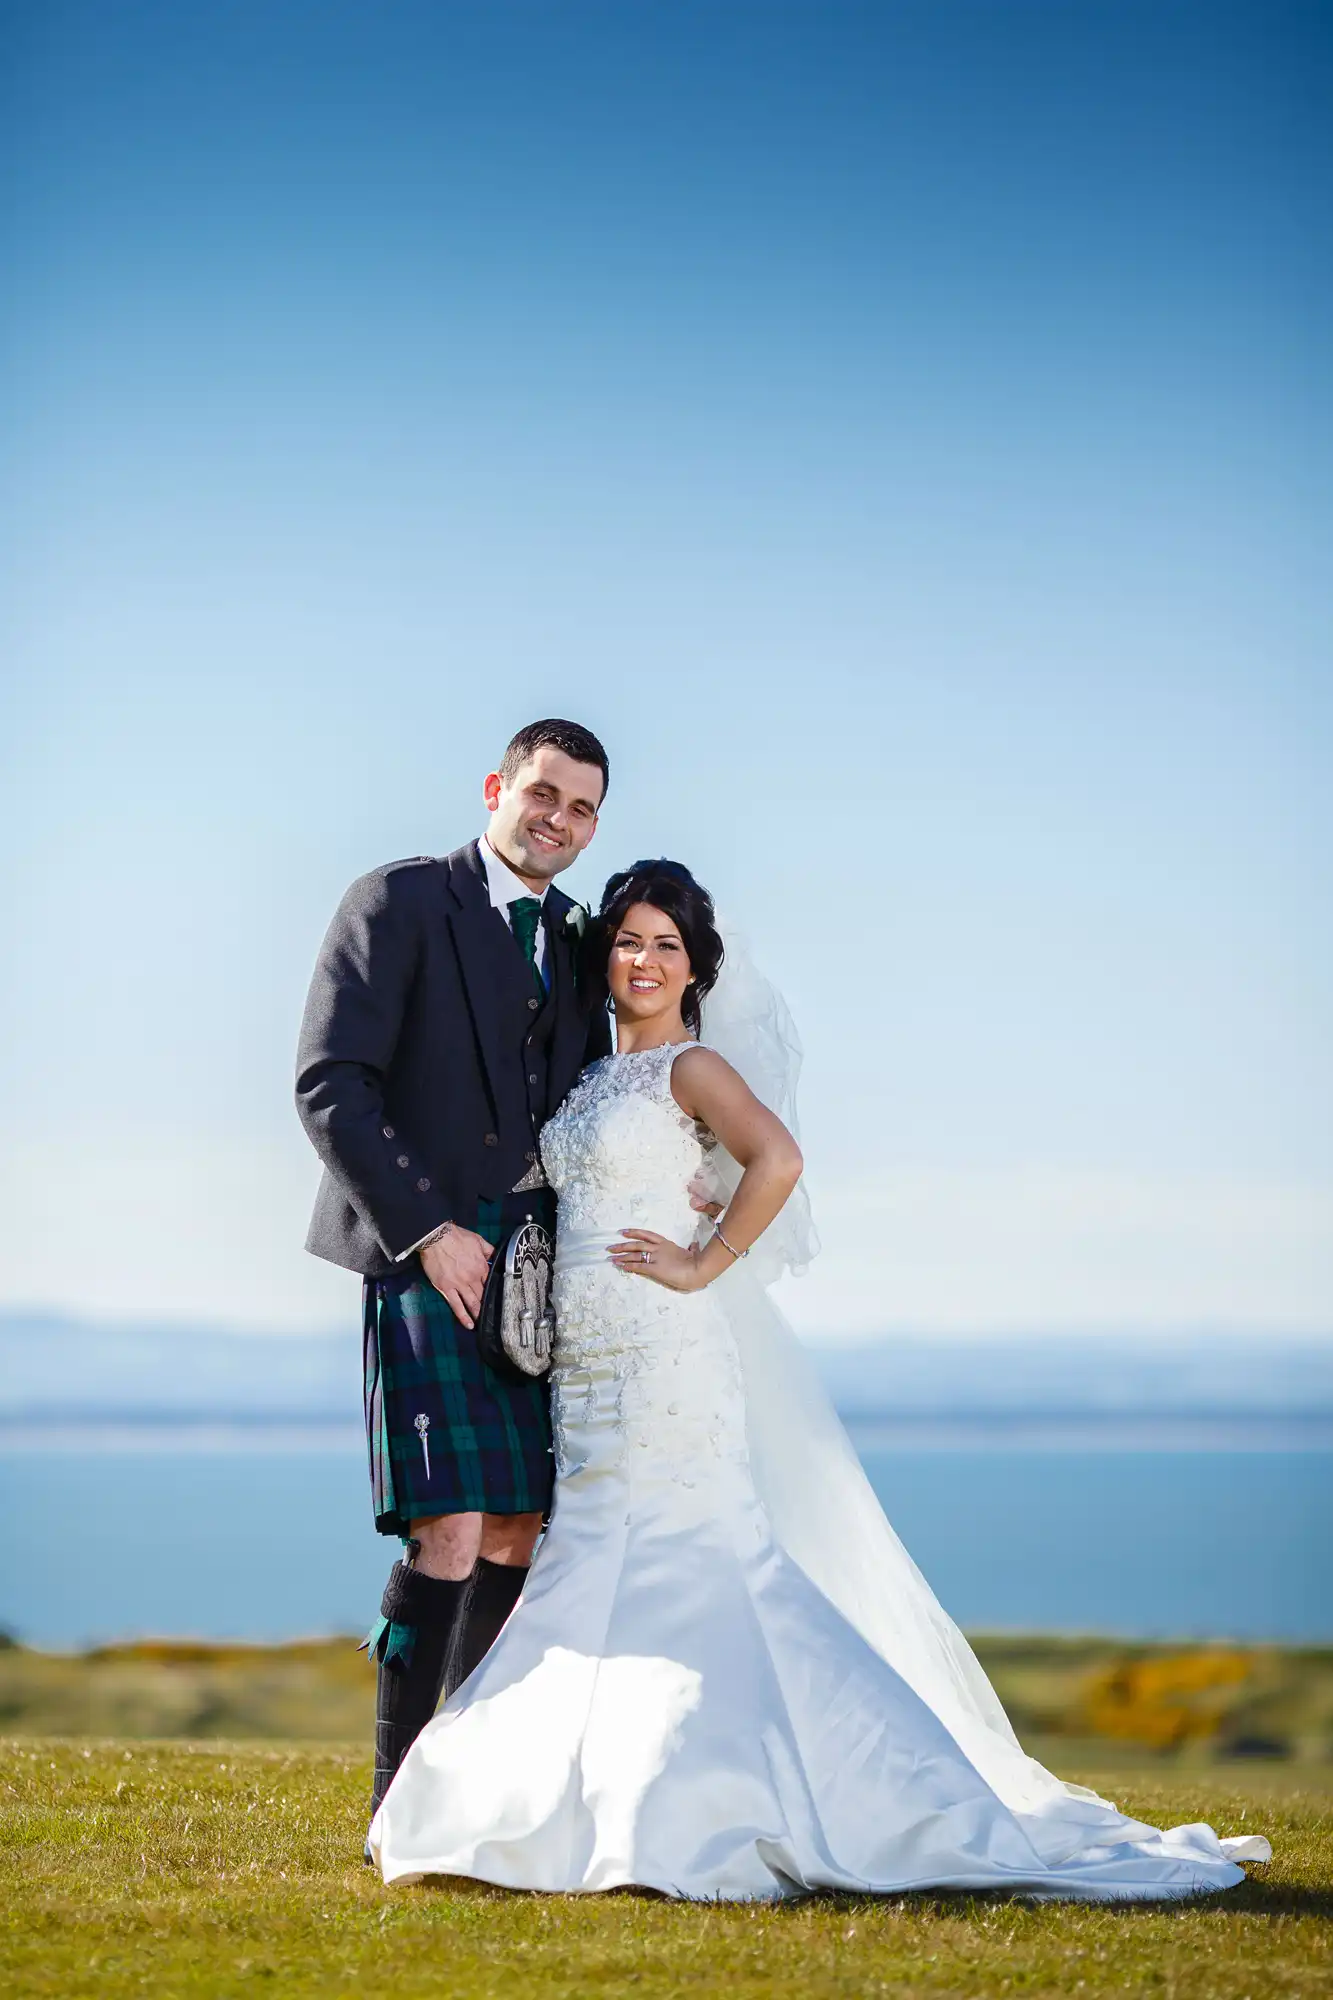 A bride in a white dress and a groom in a kilt stand together on a grassy field with a clear blue sky and distant sea behind them.